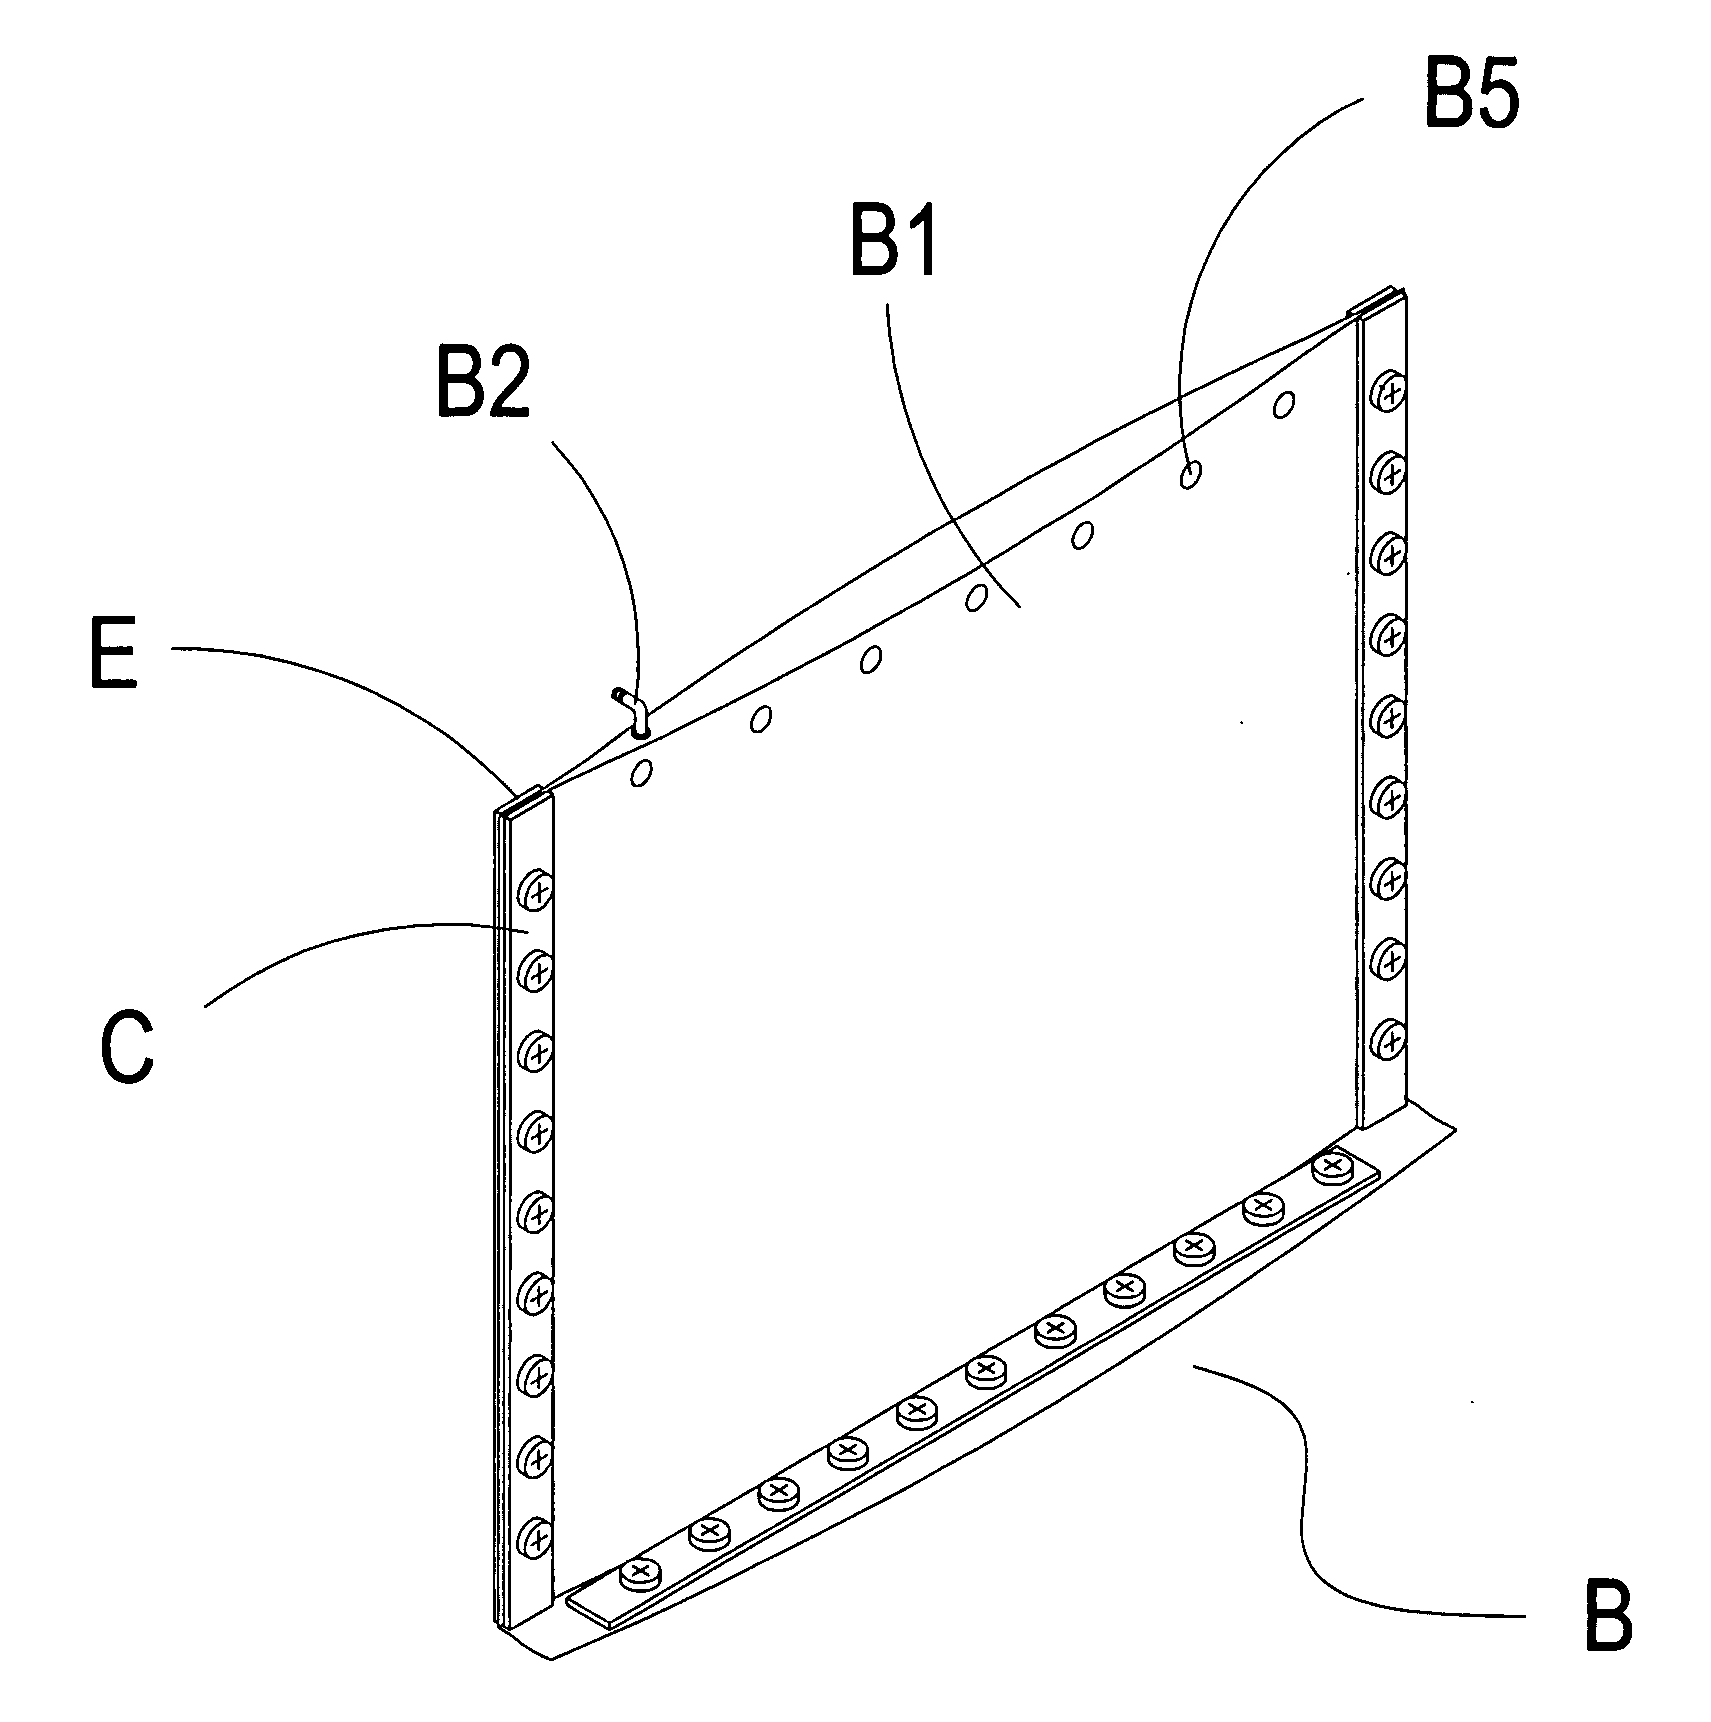 Waterproof gate assembly structure